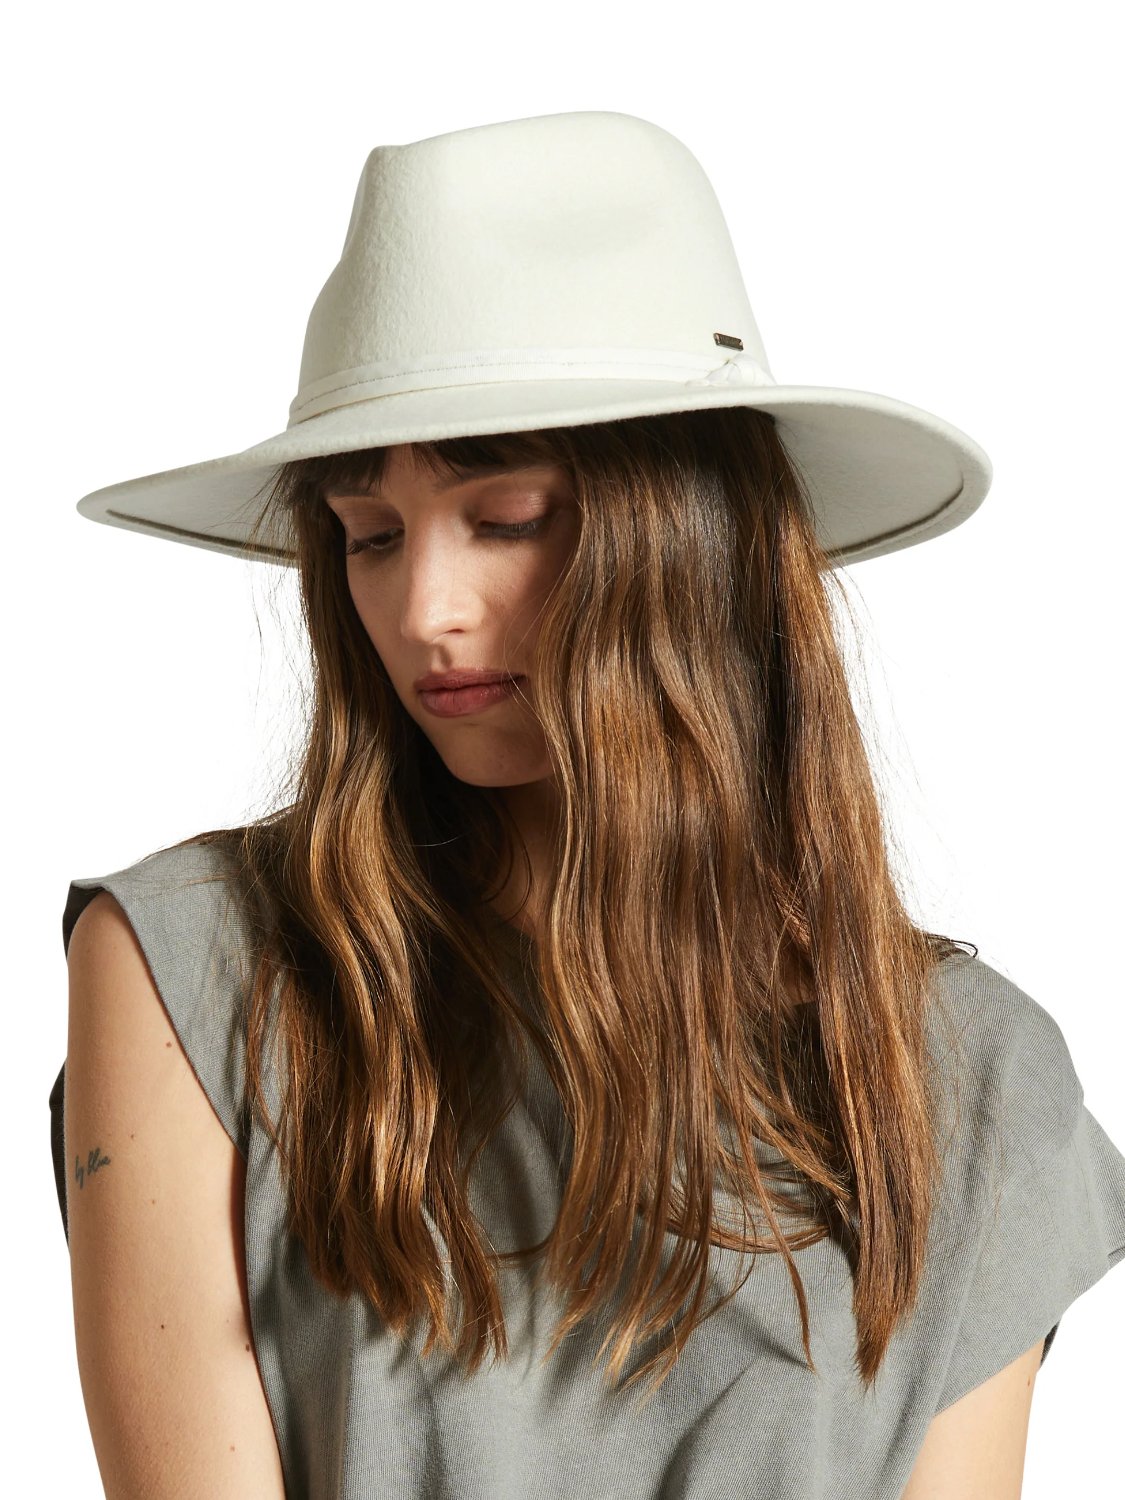 Brixton Joanna Packable Hat Off White, M